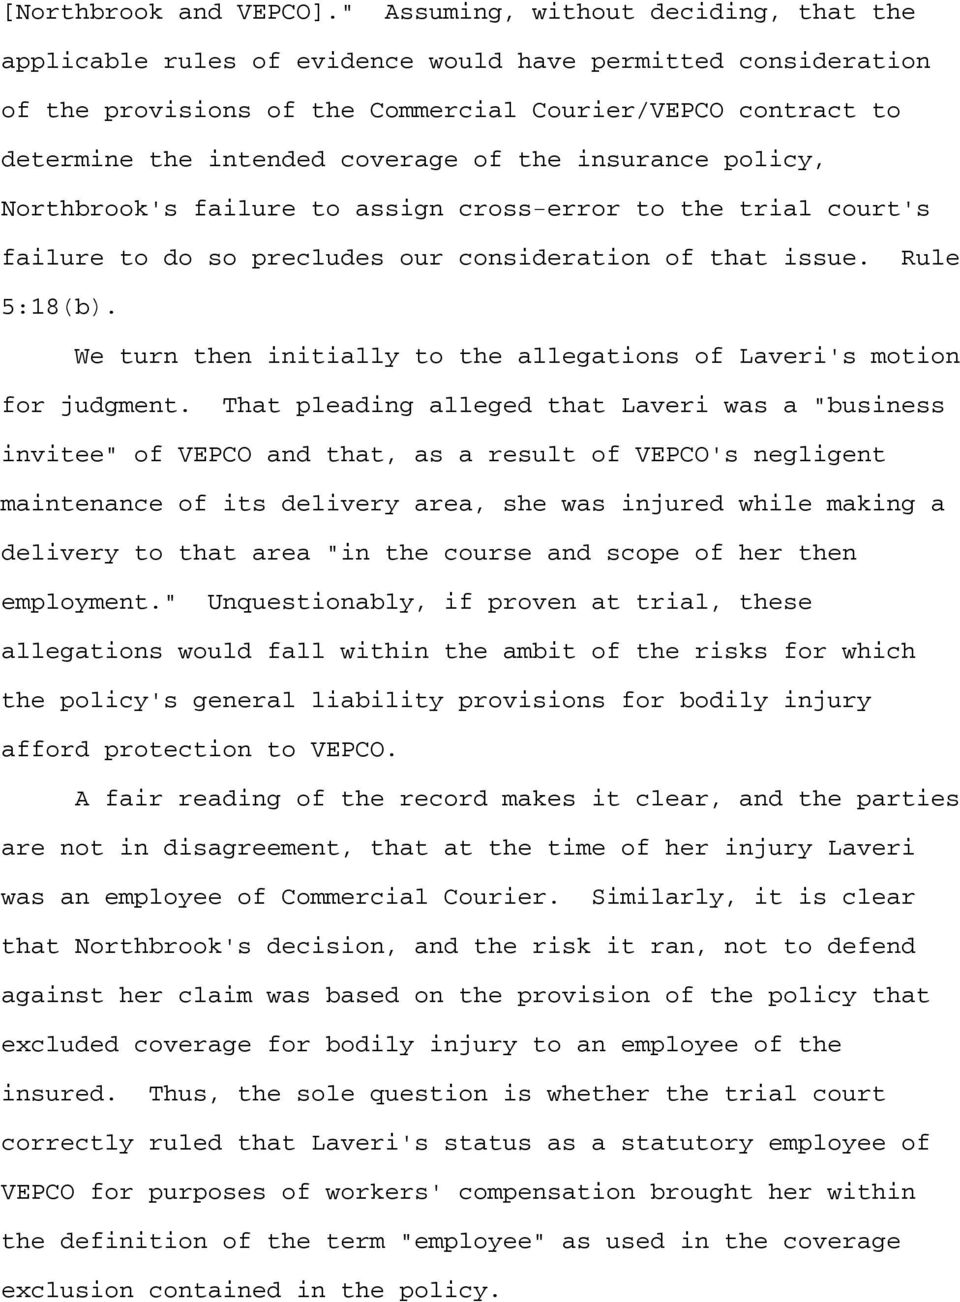 the insurance policy, Northbrook's failure to assign cross-error to the trial court's failure to do so precludes our consideration of that issue. Rule 5:18(b).